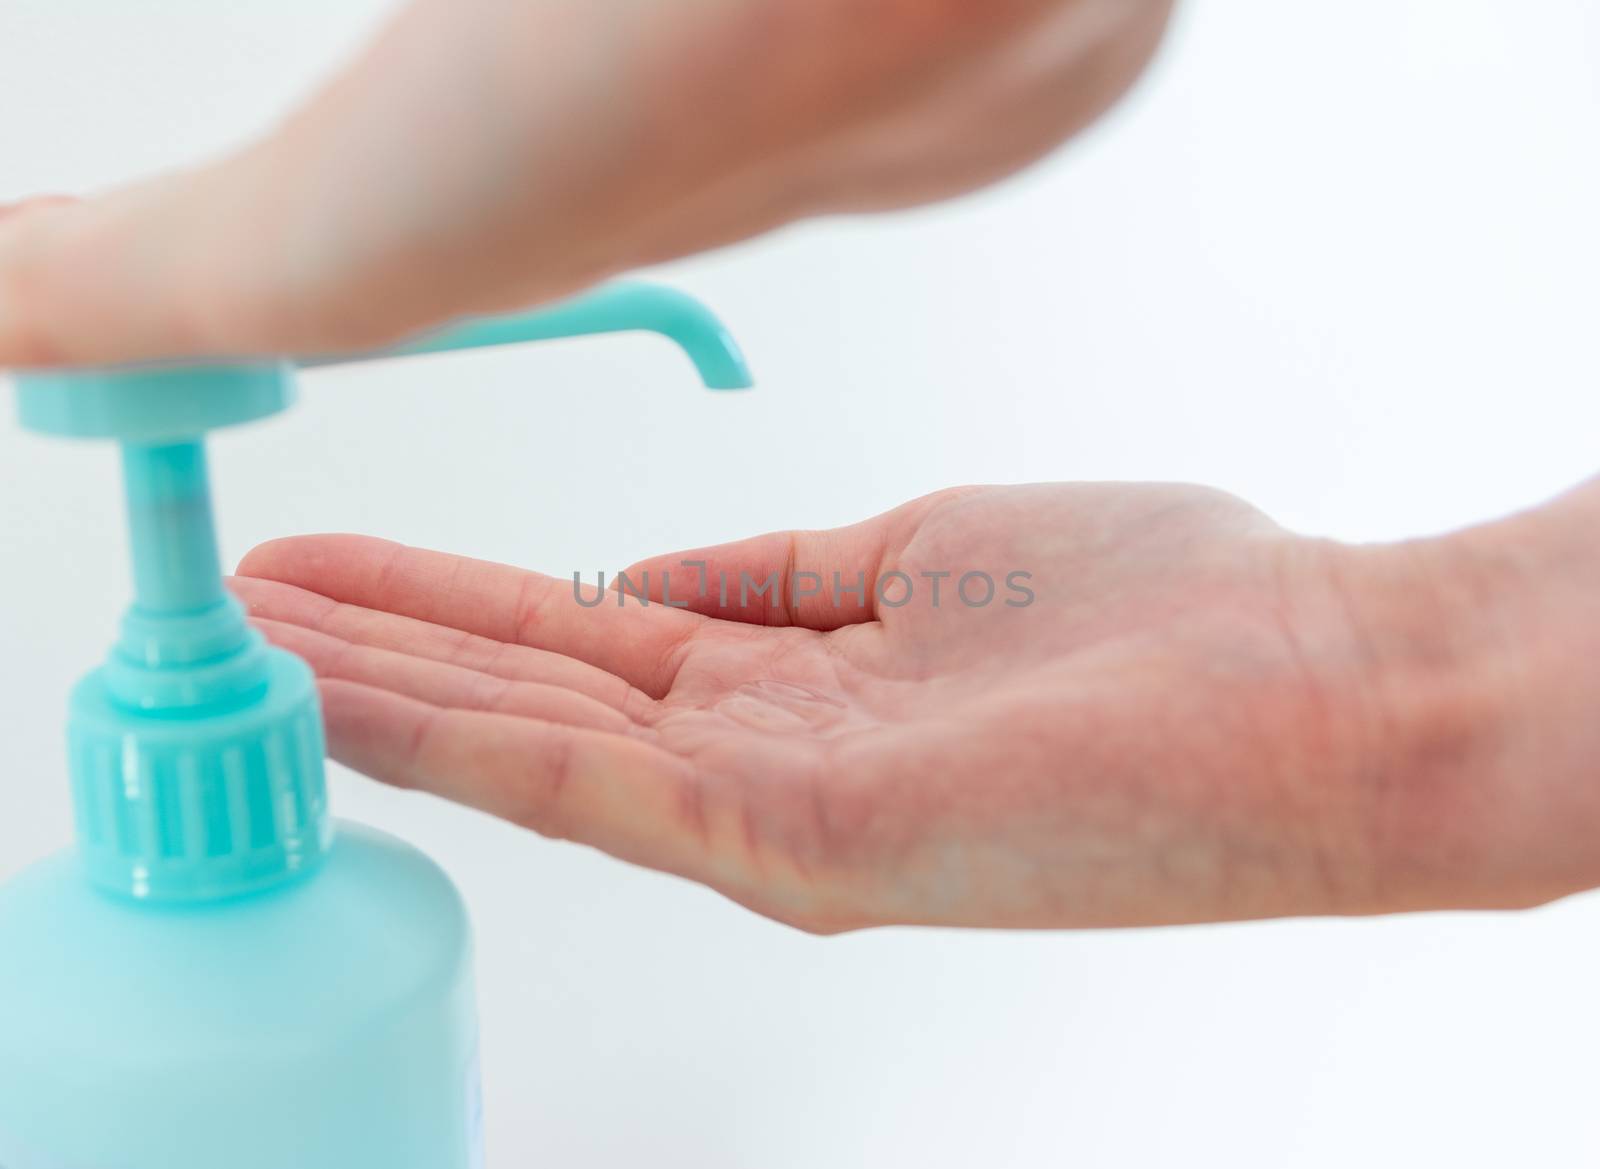 Woman washing hands with hand sanitizer alcohol antibacterial to prevent germs, bacteria and avoid coronavirus by nicousnake